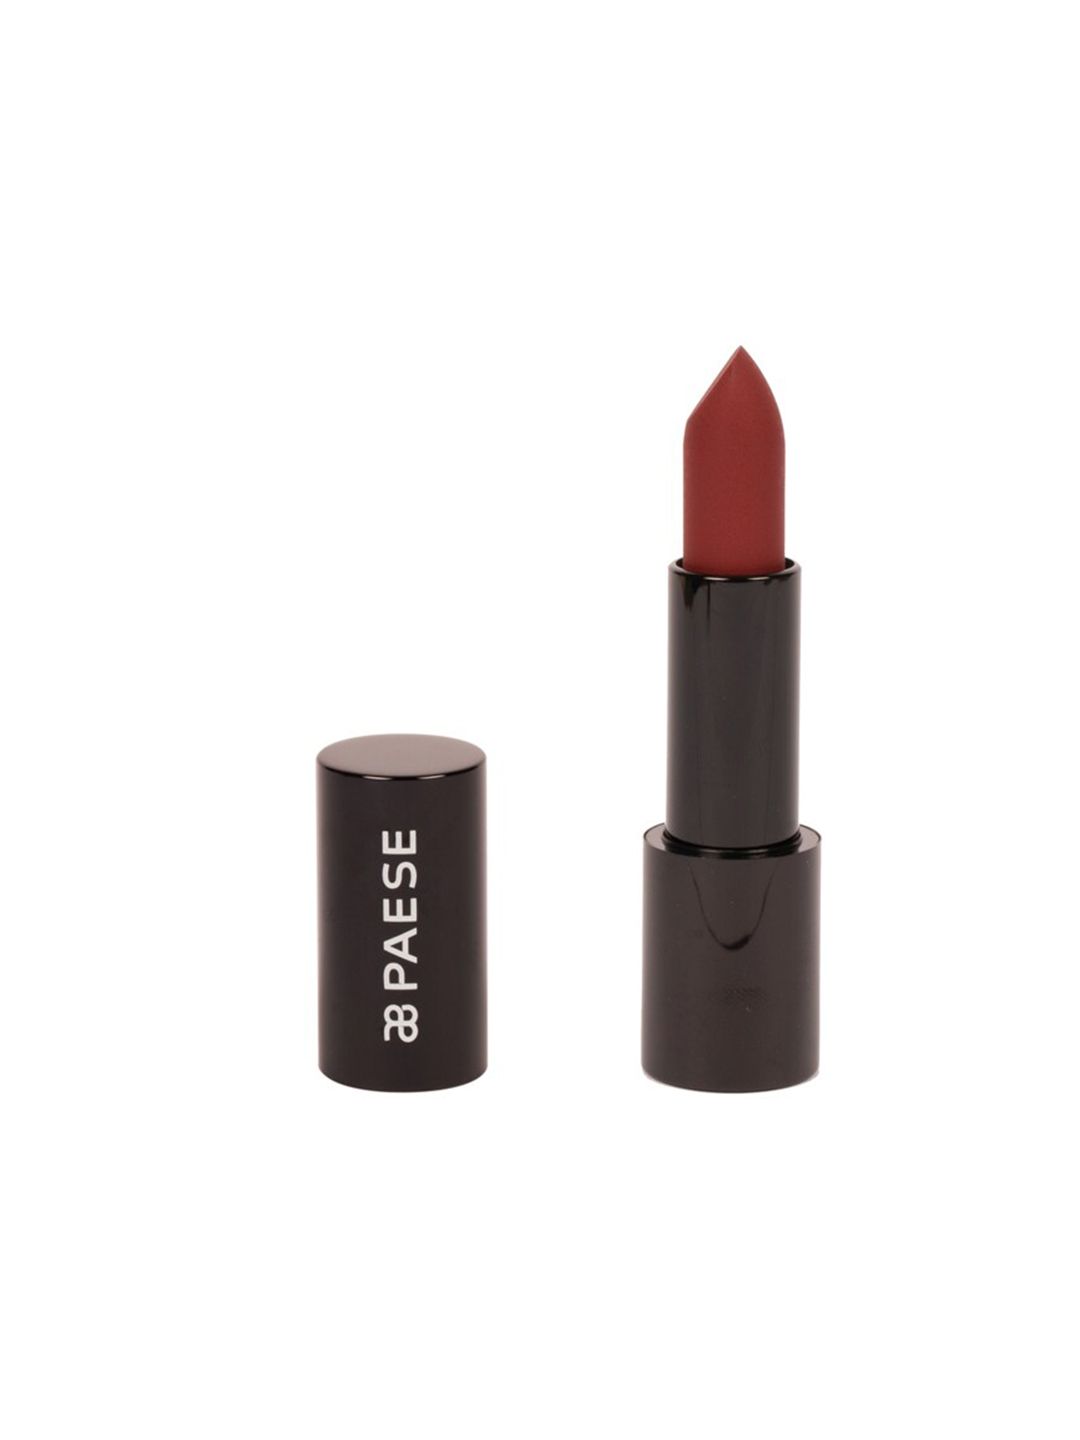 Paese Cosmetics Mattologie Matte Lipstick with Rice Oil 4.3 g - Well Red 102 Price in India